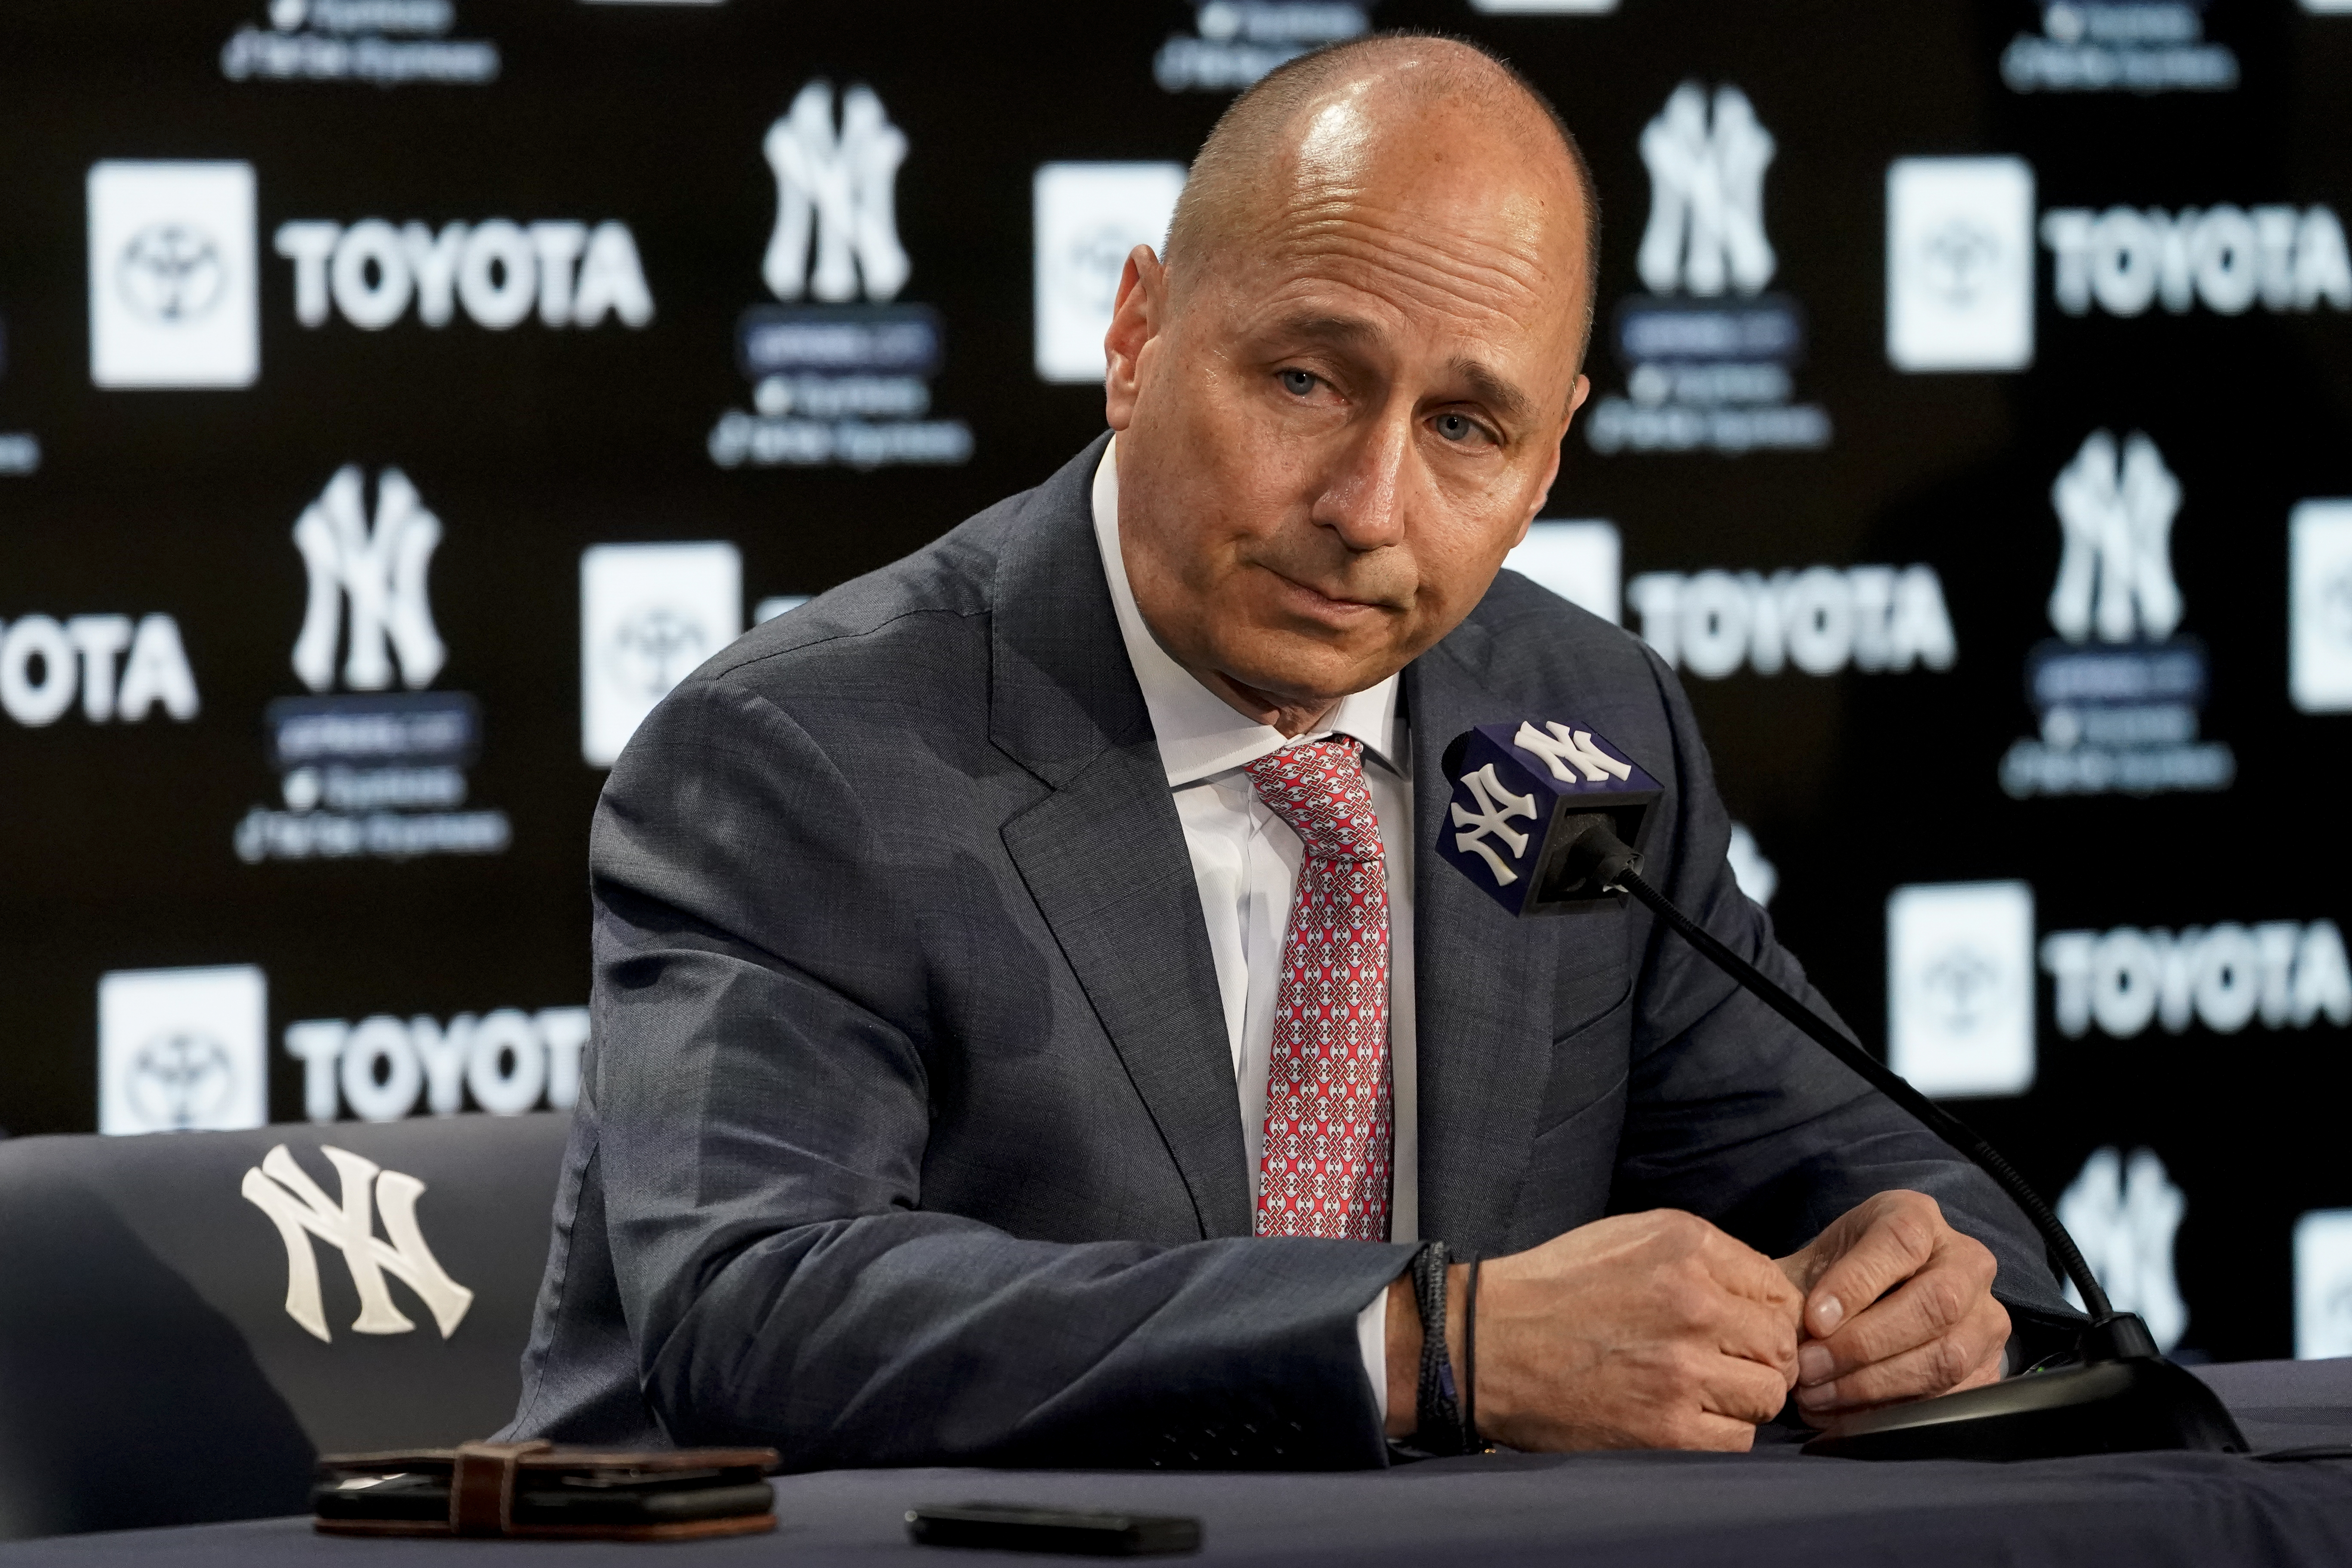 Yankees face Astros for first time since cheating scandal revealed